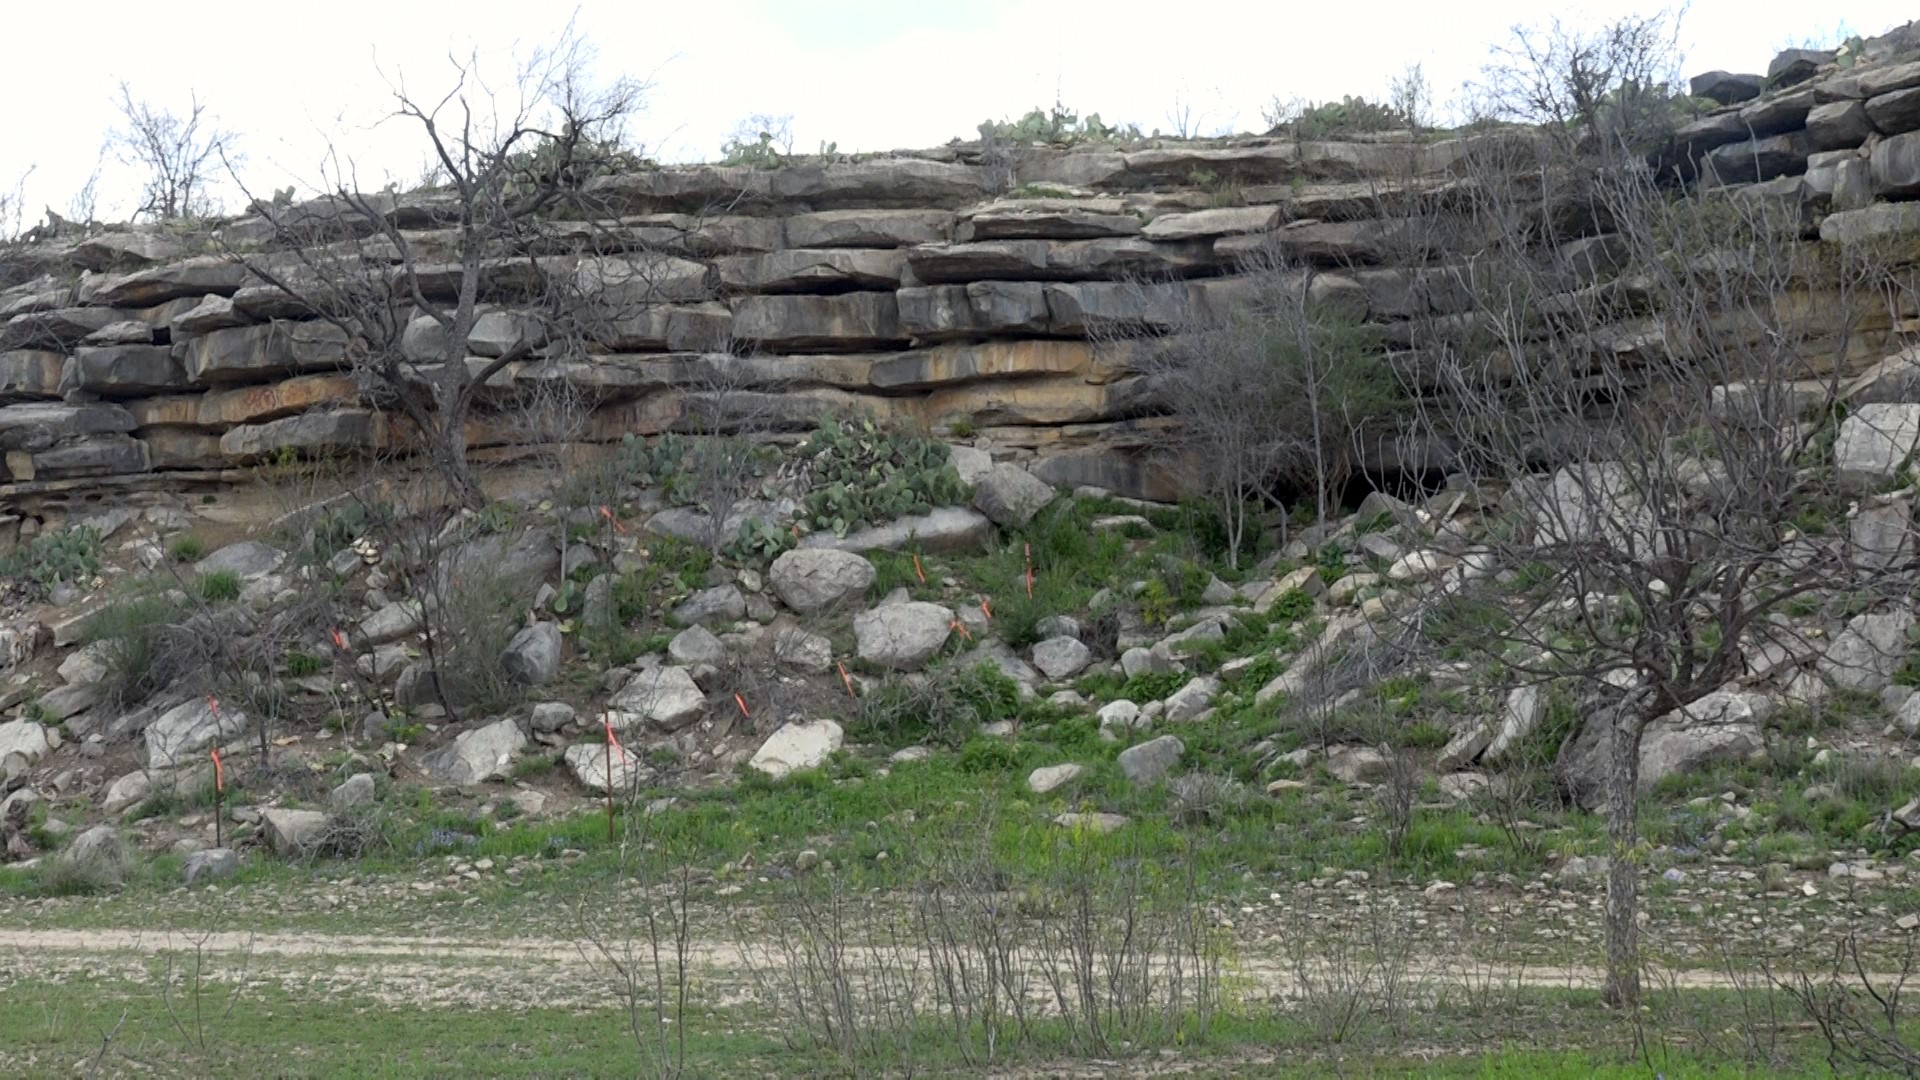 Paint Rock boasts one of the largest Native American sites in the country, with pictographs and solar markers that could go back 2,000 years.